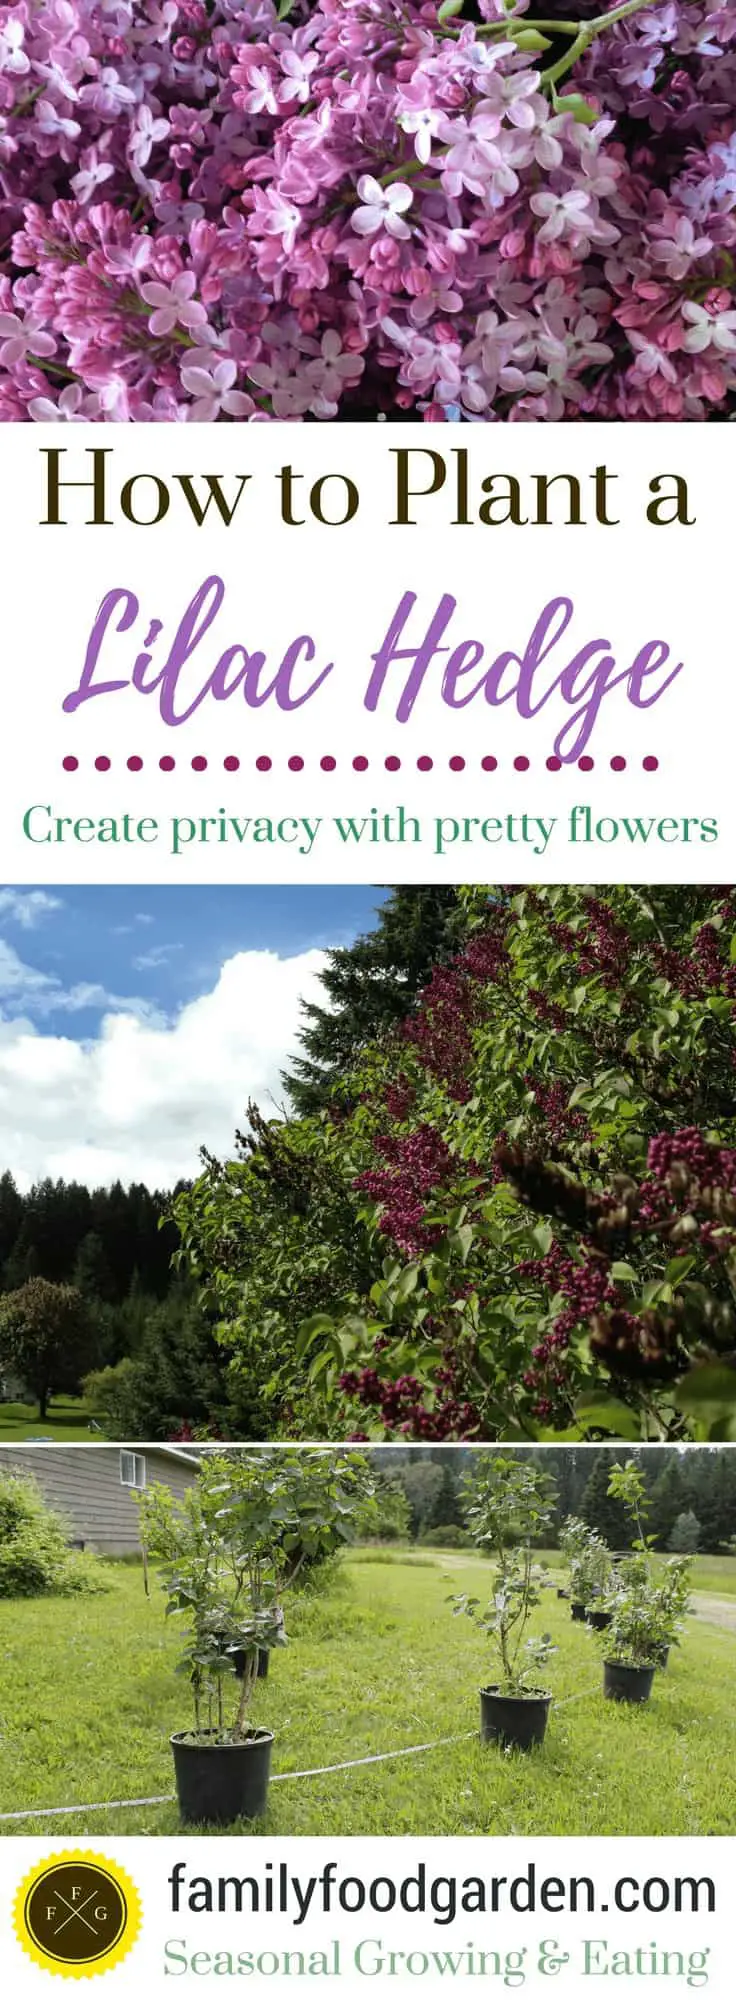 How to Plant a Lilac Hedge